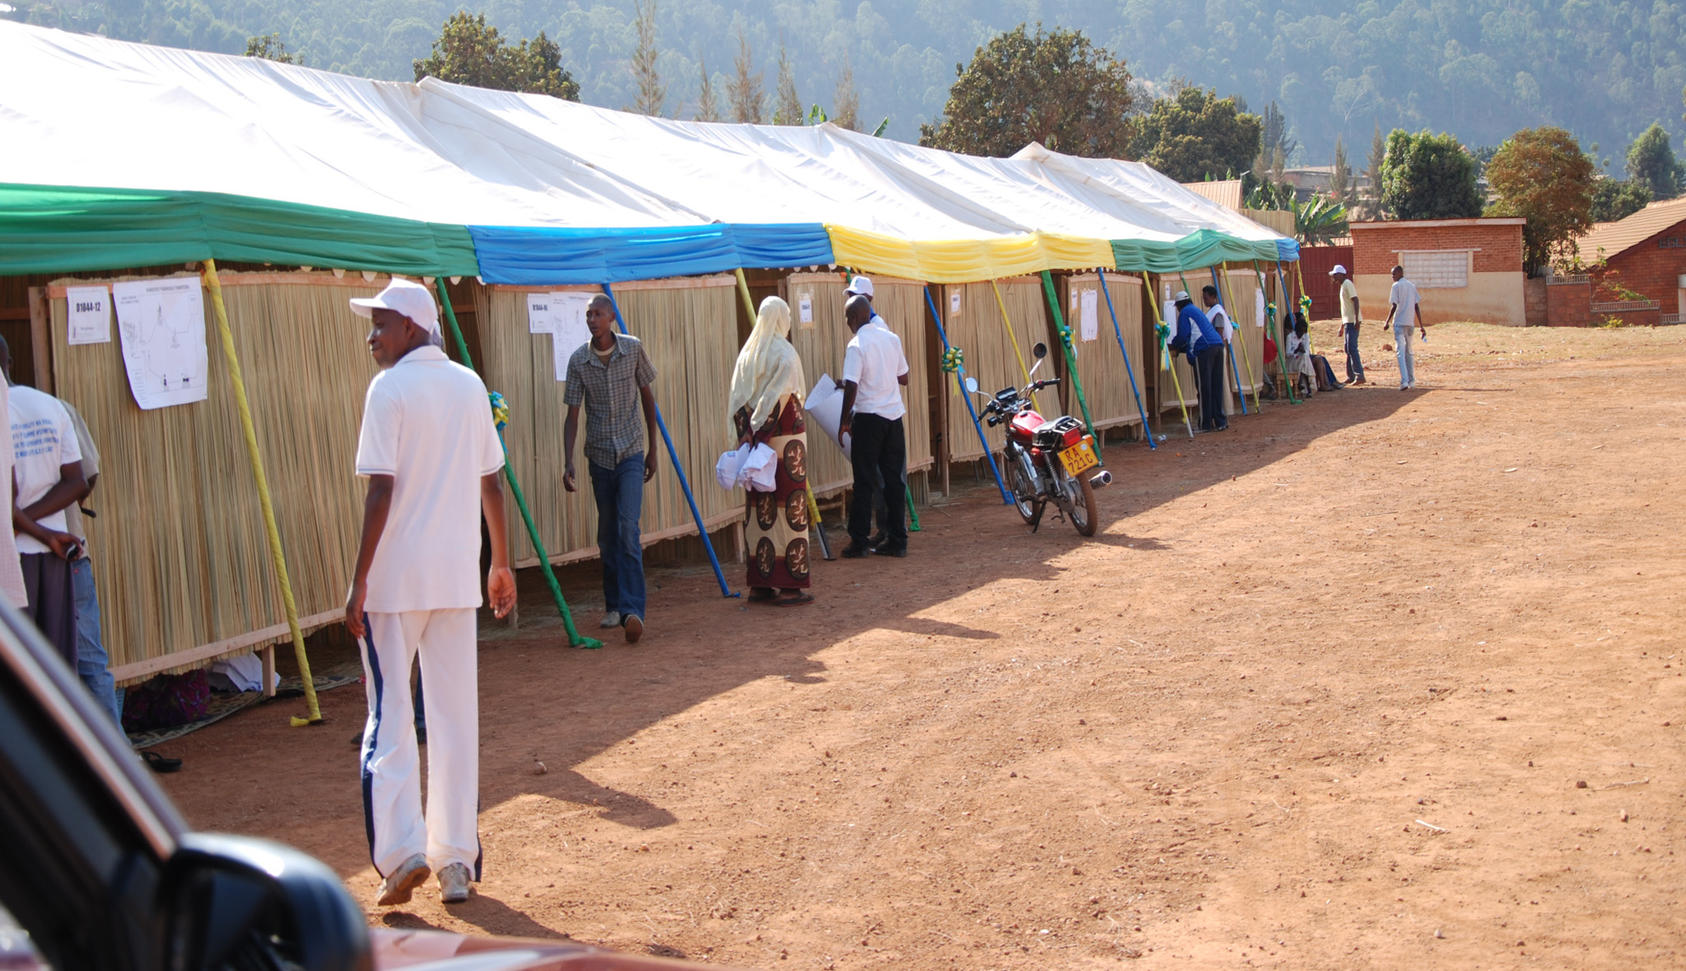 A makeshift polling station for Rwanda's presidential elections in the capital Kigali. 2010